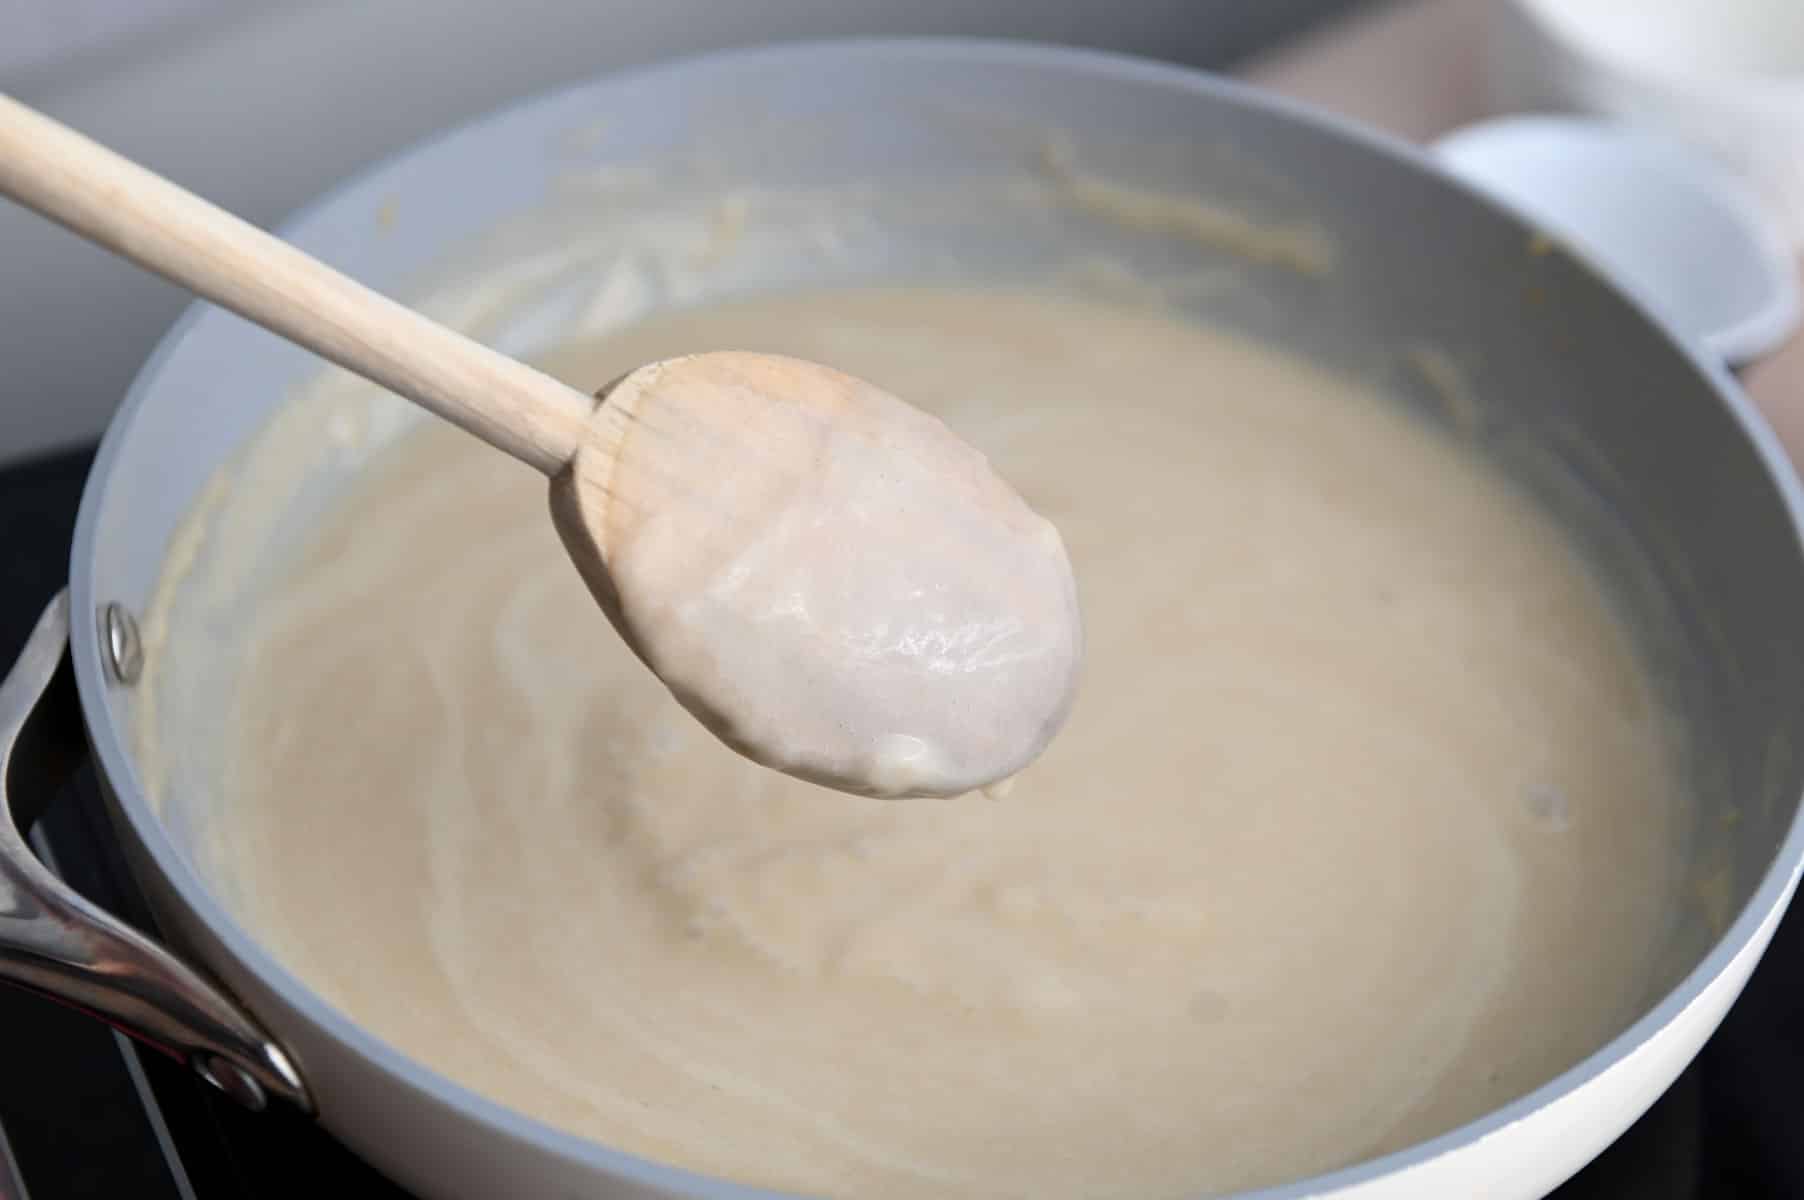 Wooden spoon lifted to show béchamel sauce on the spoon.